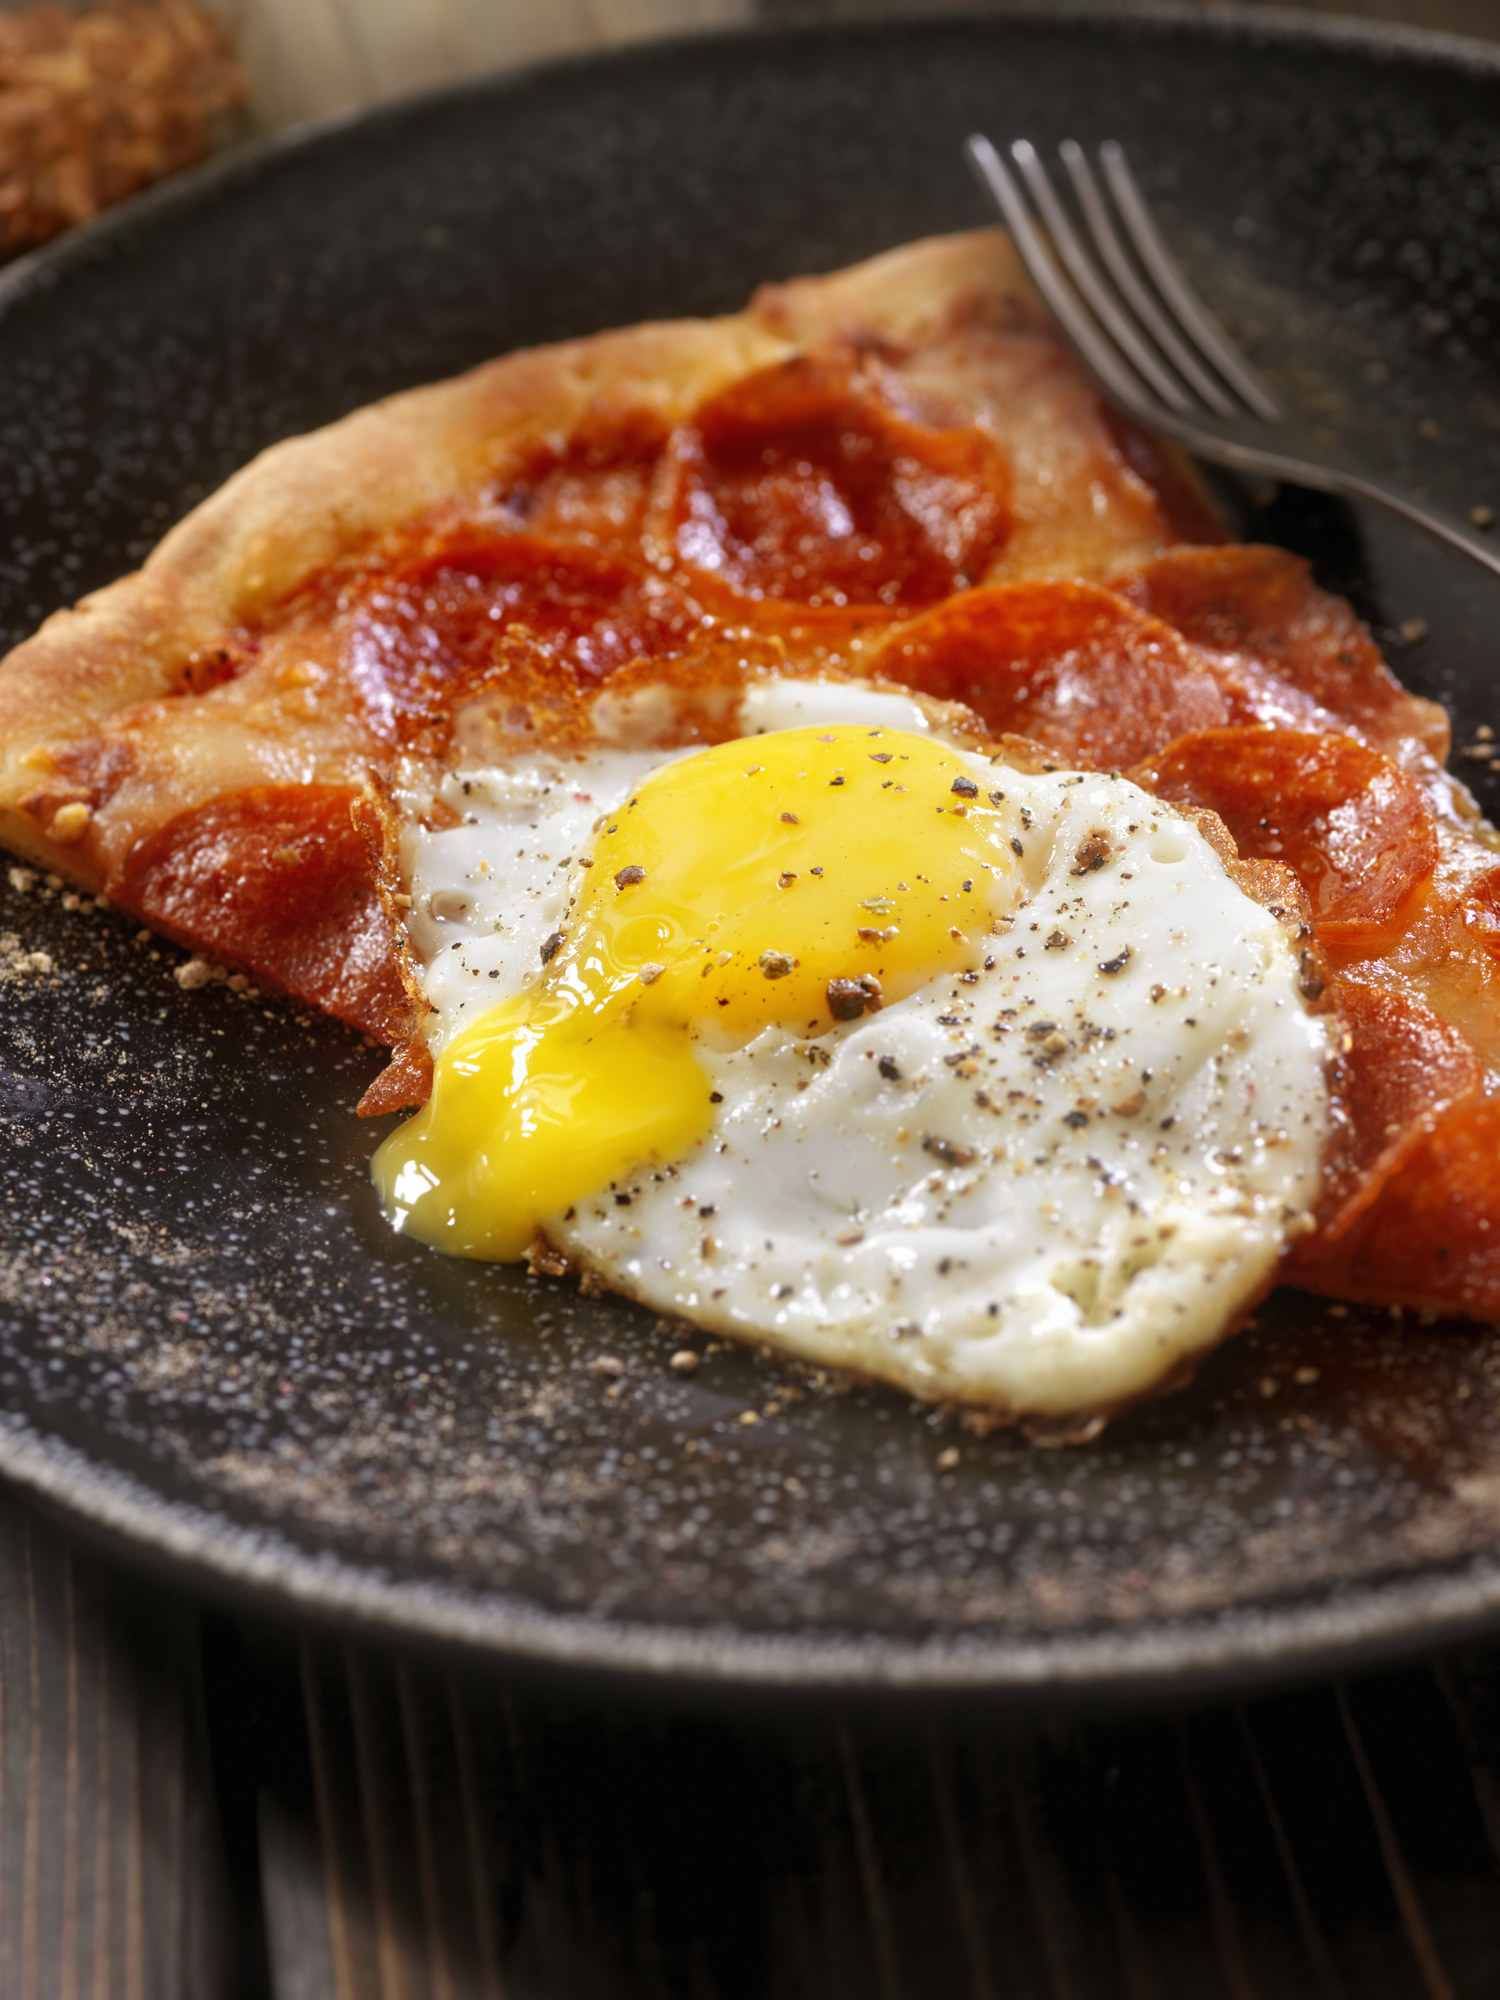 Slice of pizza with fried egg on top